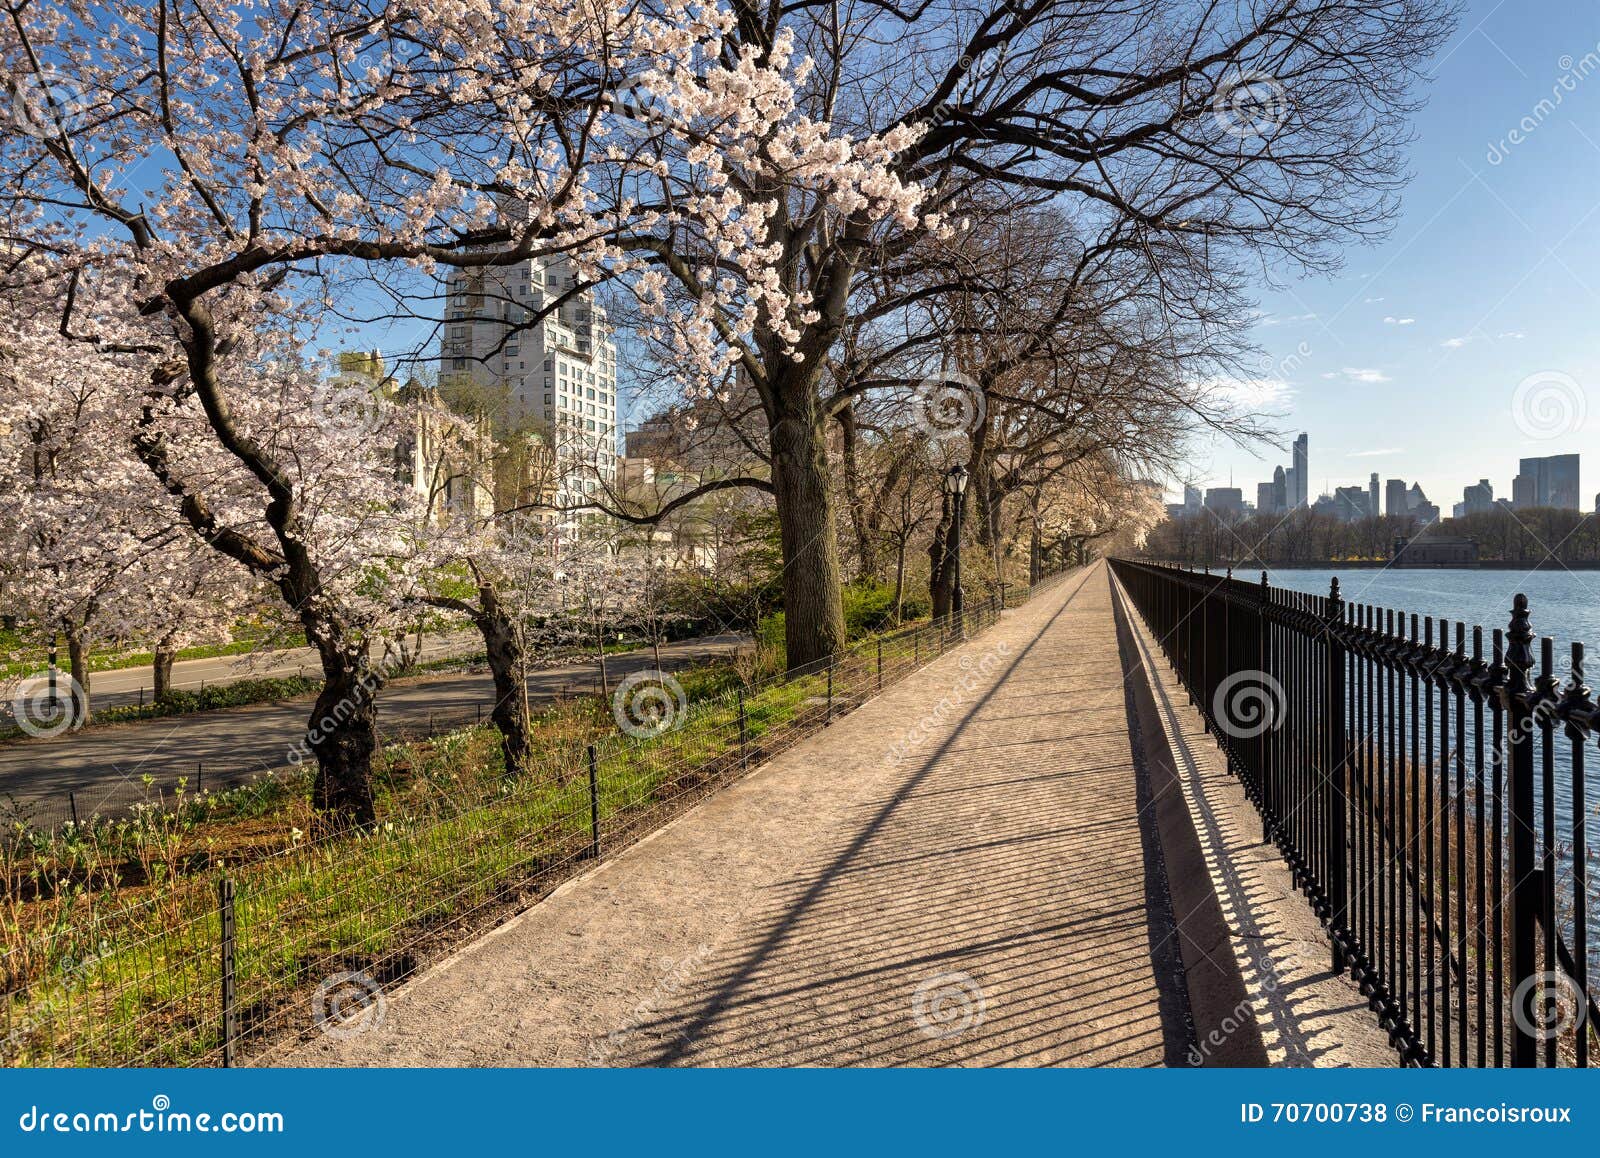 spring in central park and upper east side. new york